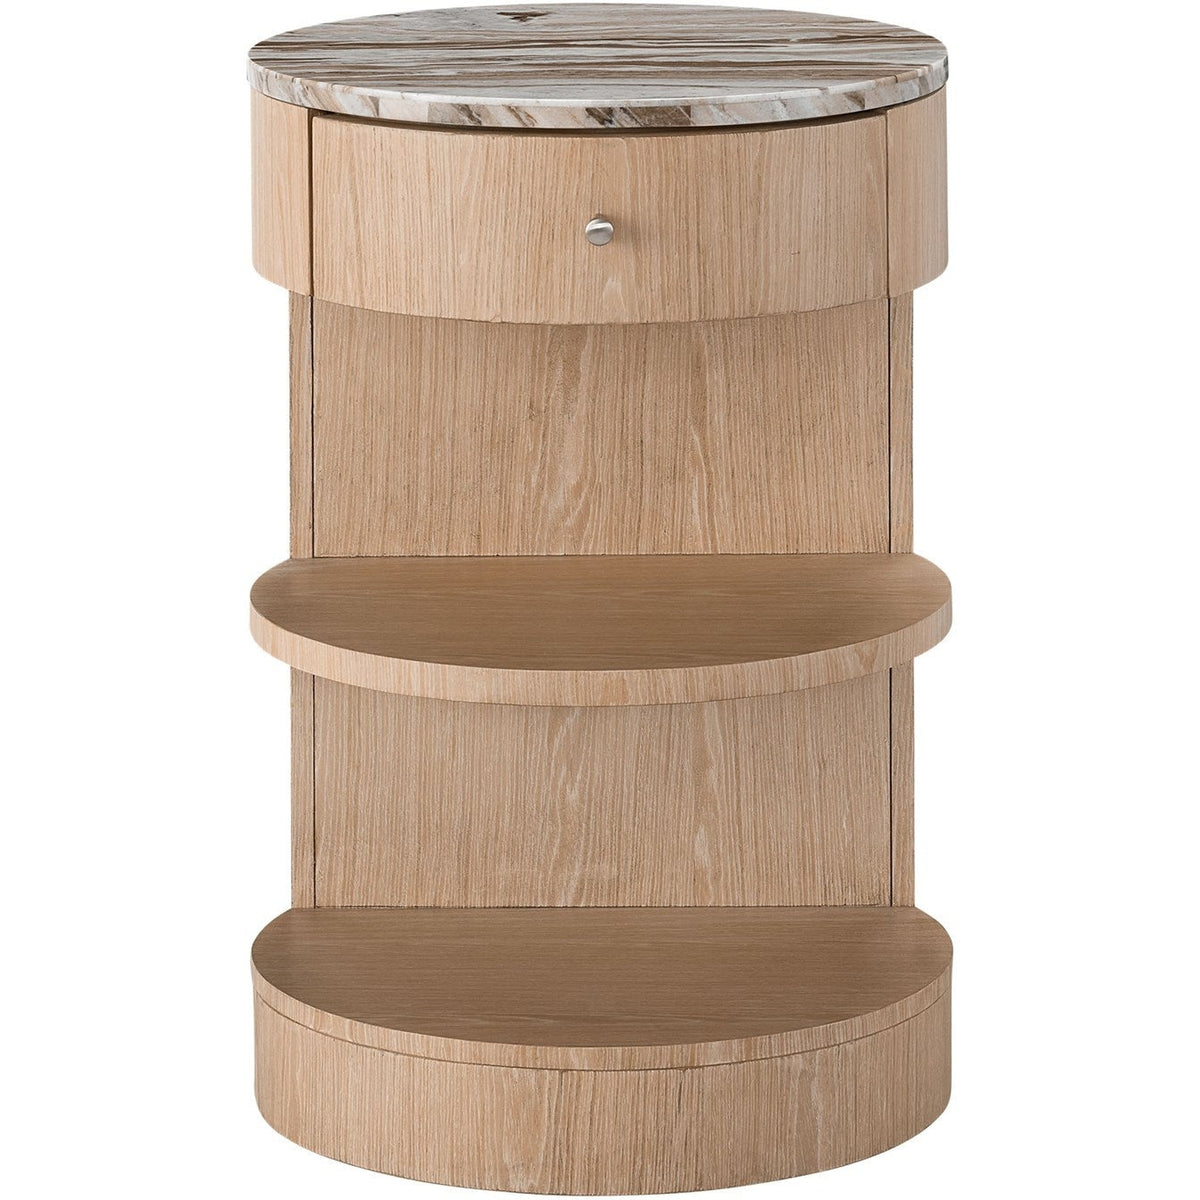 Two Tier Wood Caddy - Kitchen Organizer - The Nomad Studio